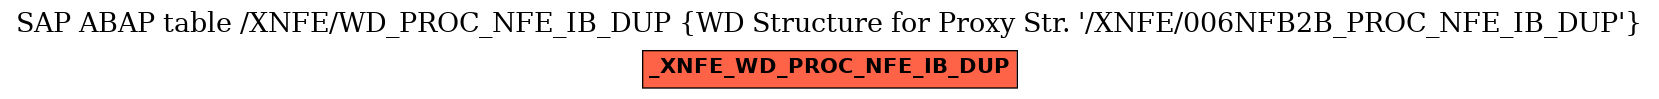 E-R Diagram for table /XNFE/WD_PROC_NFE_IB_DUP (WD Structure for Proxy Str. 